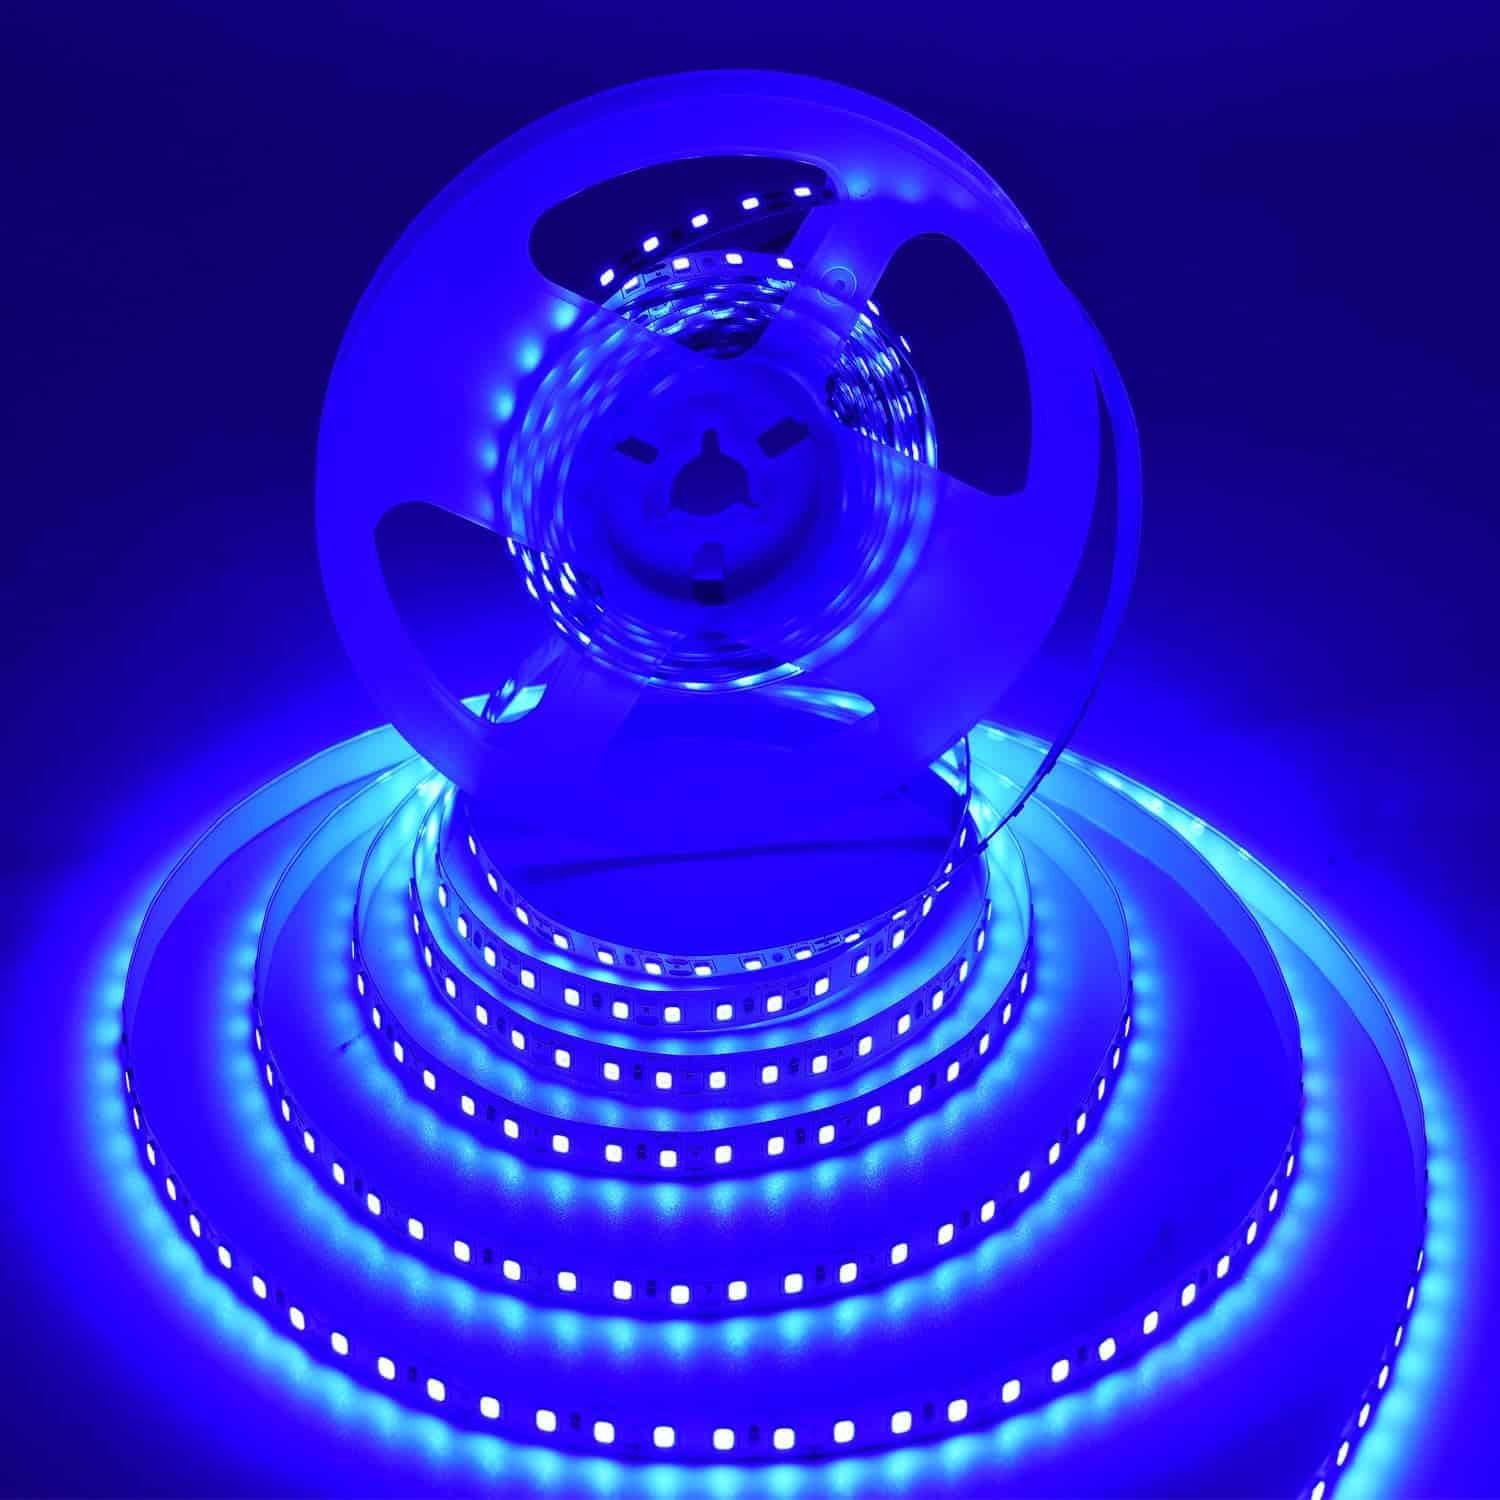 SUYOOULIN LED Strip Lights, 66ft/20m SMD 2835 2400 LEDs Light Strips, 36000LM Flexible AC 110V Waterproof IP68 LED Ribbon, DIY Christmas Home Kitchen Indoor Party Decoration(Blue)